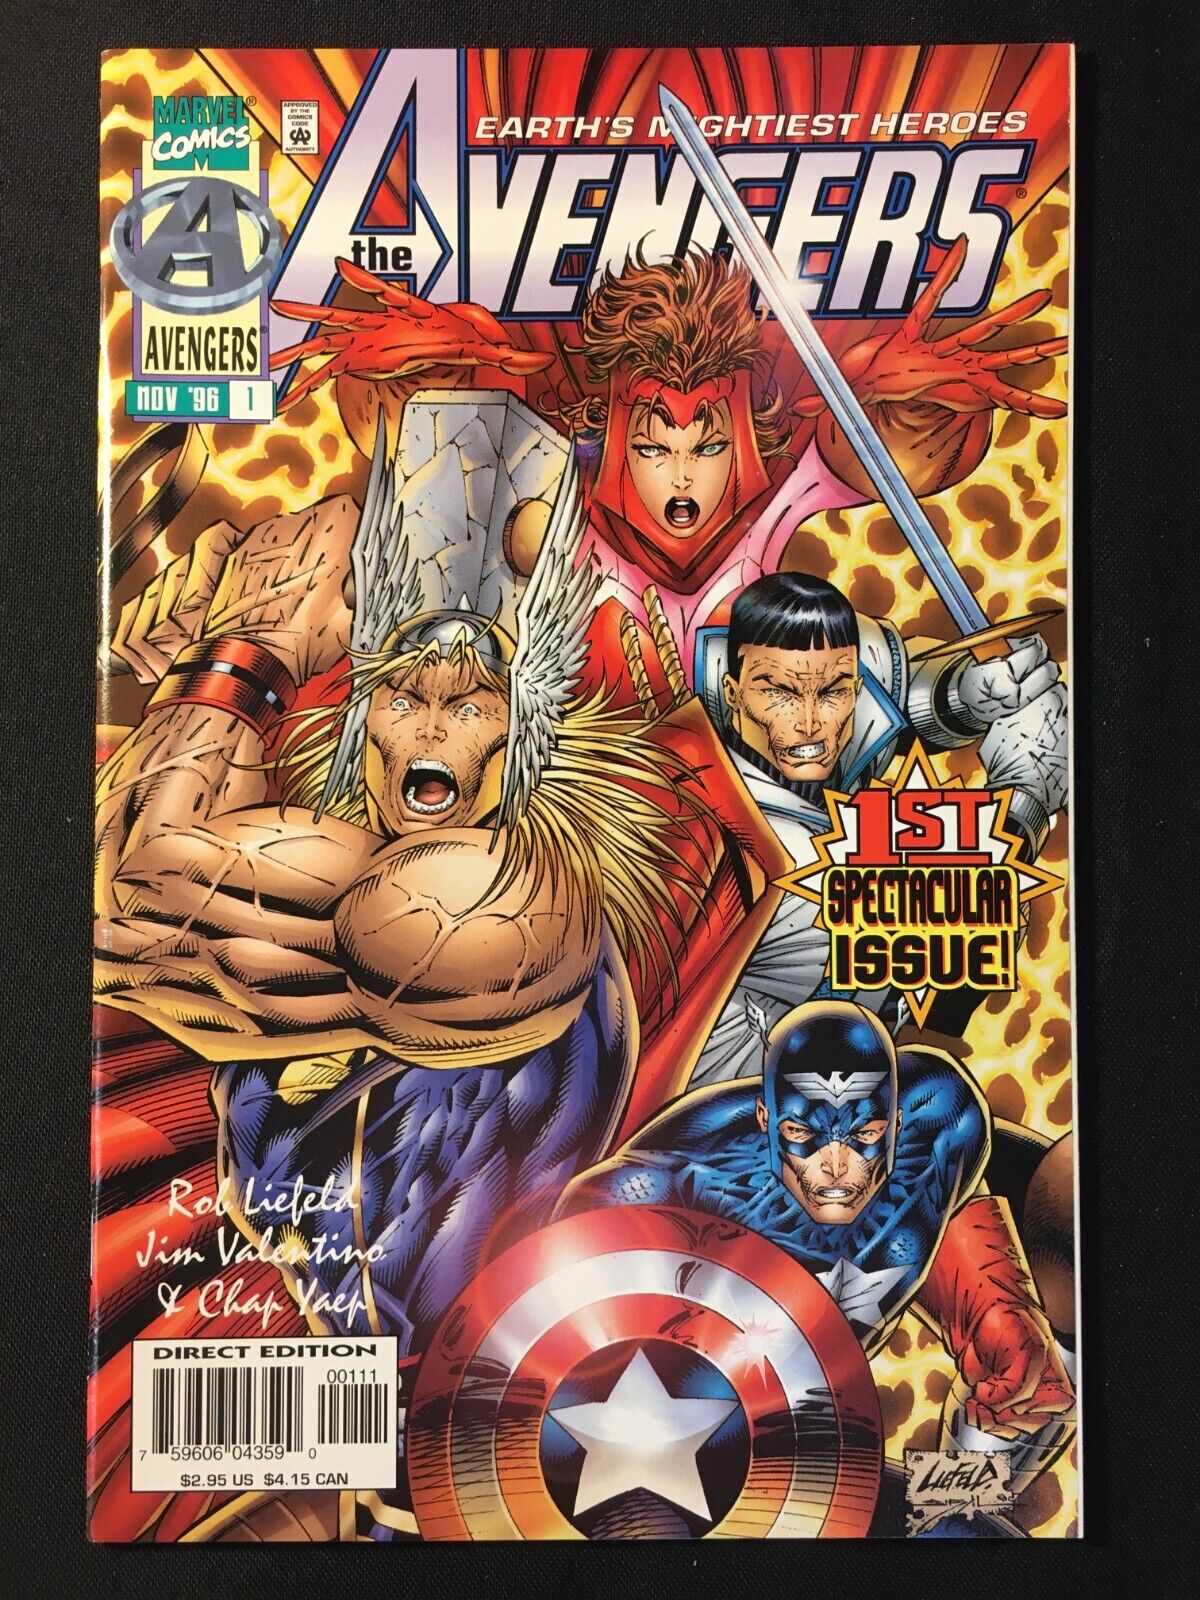 AVENGERS 1 KEY 1st app SWORDSMAN DEADPOOL ROB LIEFELD COVER SCARLET WITCH THOR